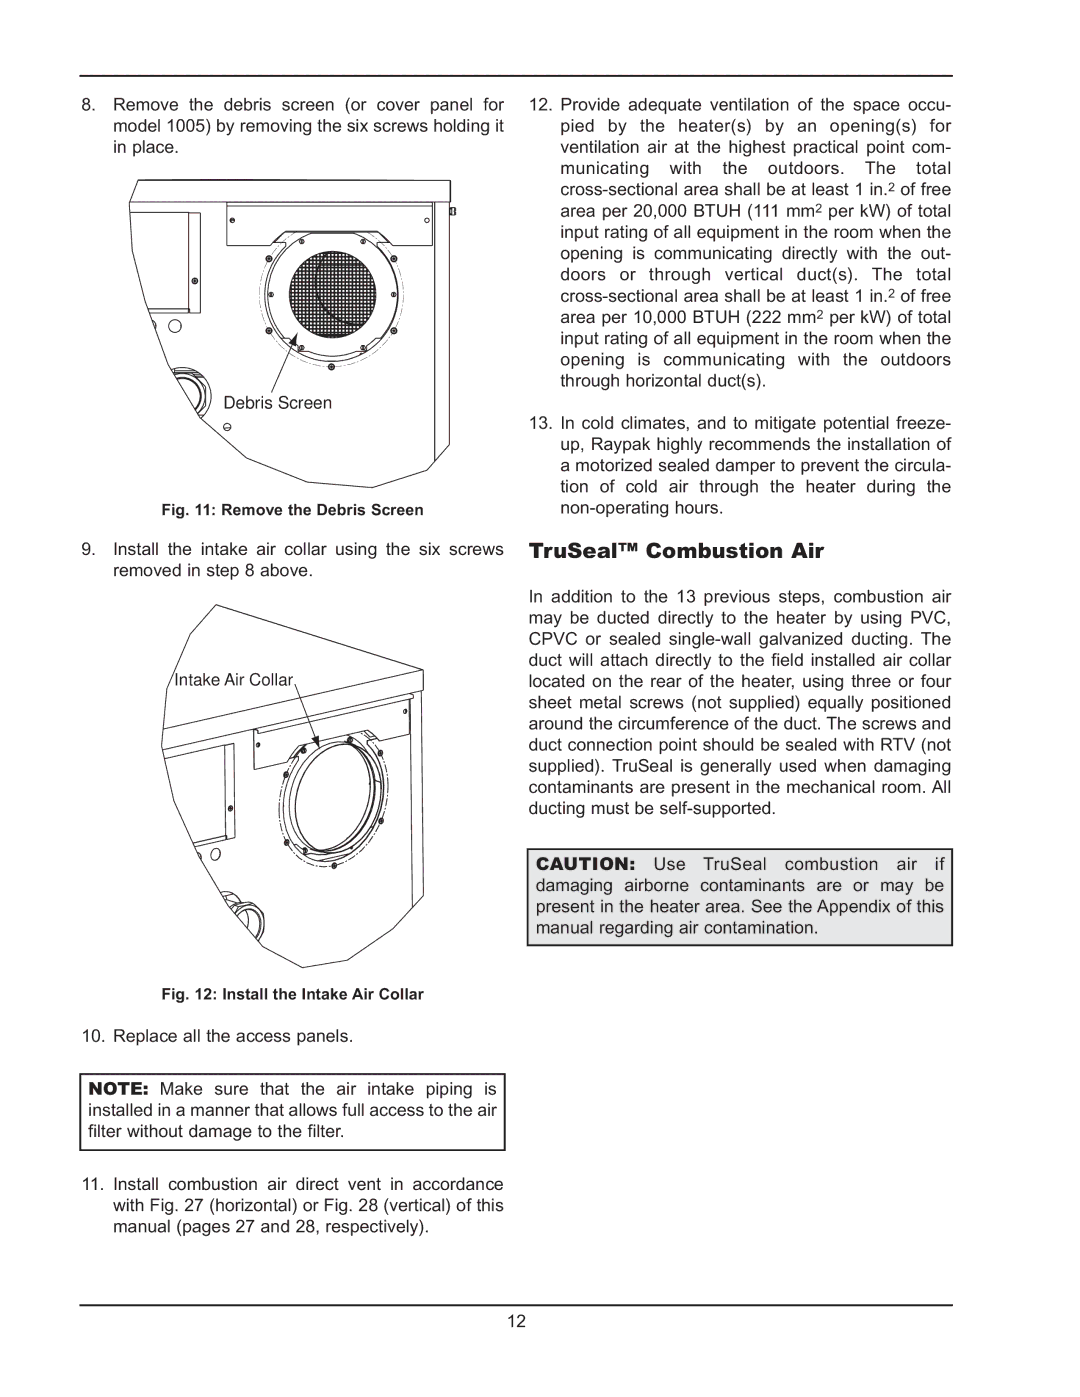 Raypak 1005 operating instructions TruSeal Combustion Air, Remove the Debris Screen 